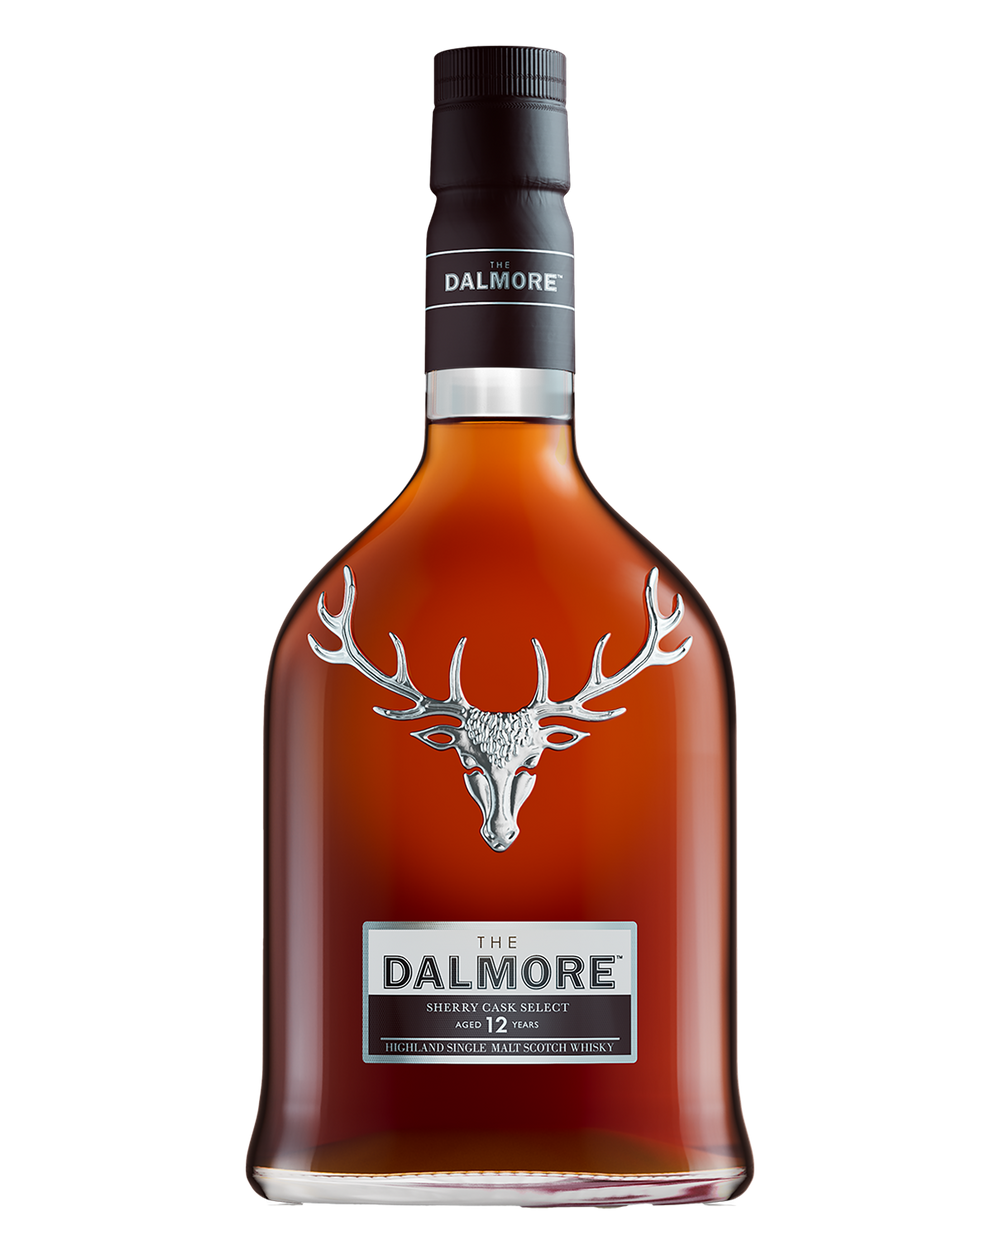 The Dalmore 12 years Sherry Cask